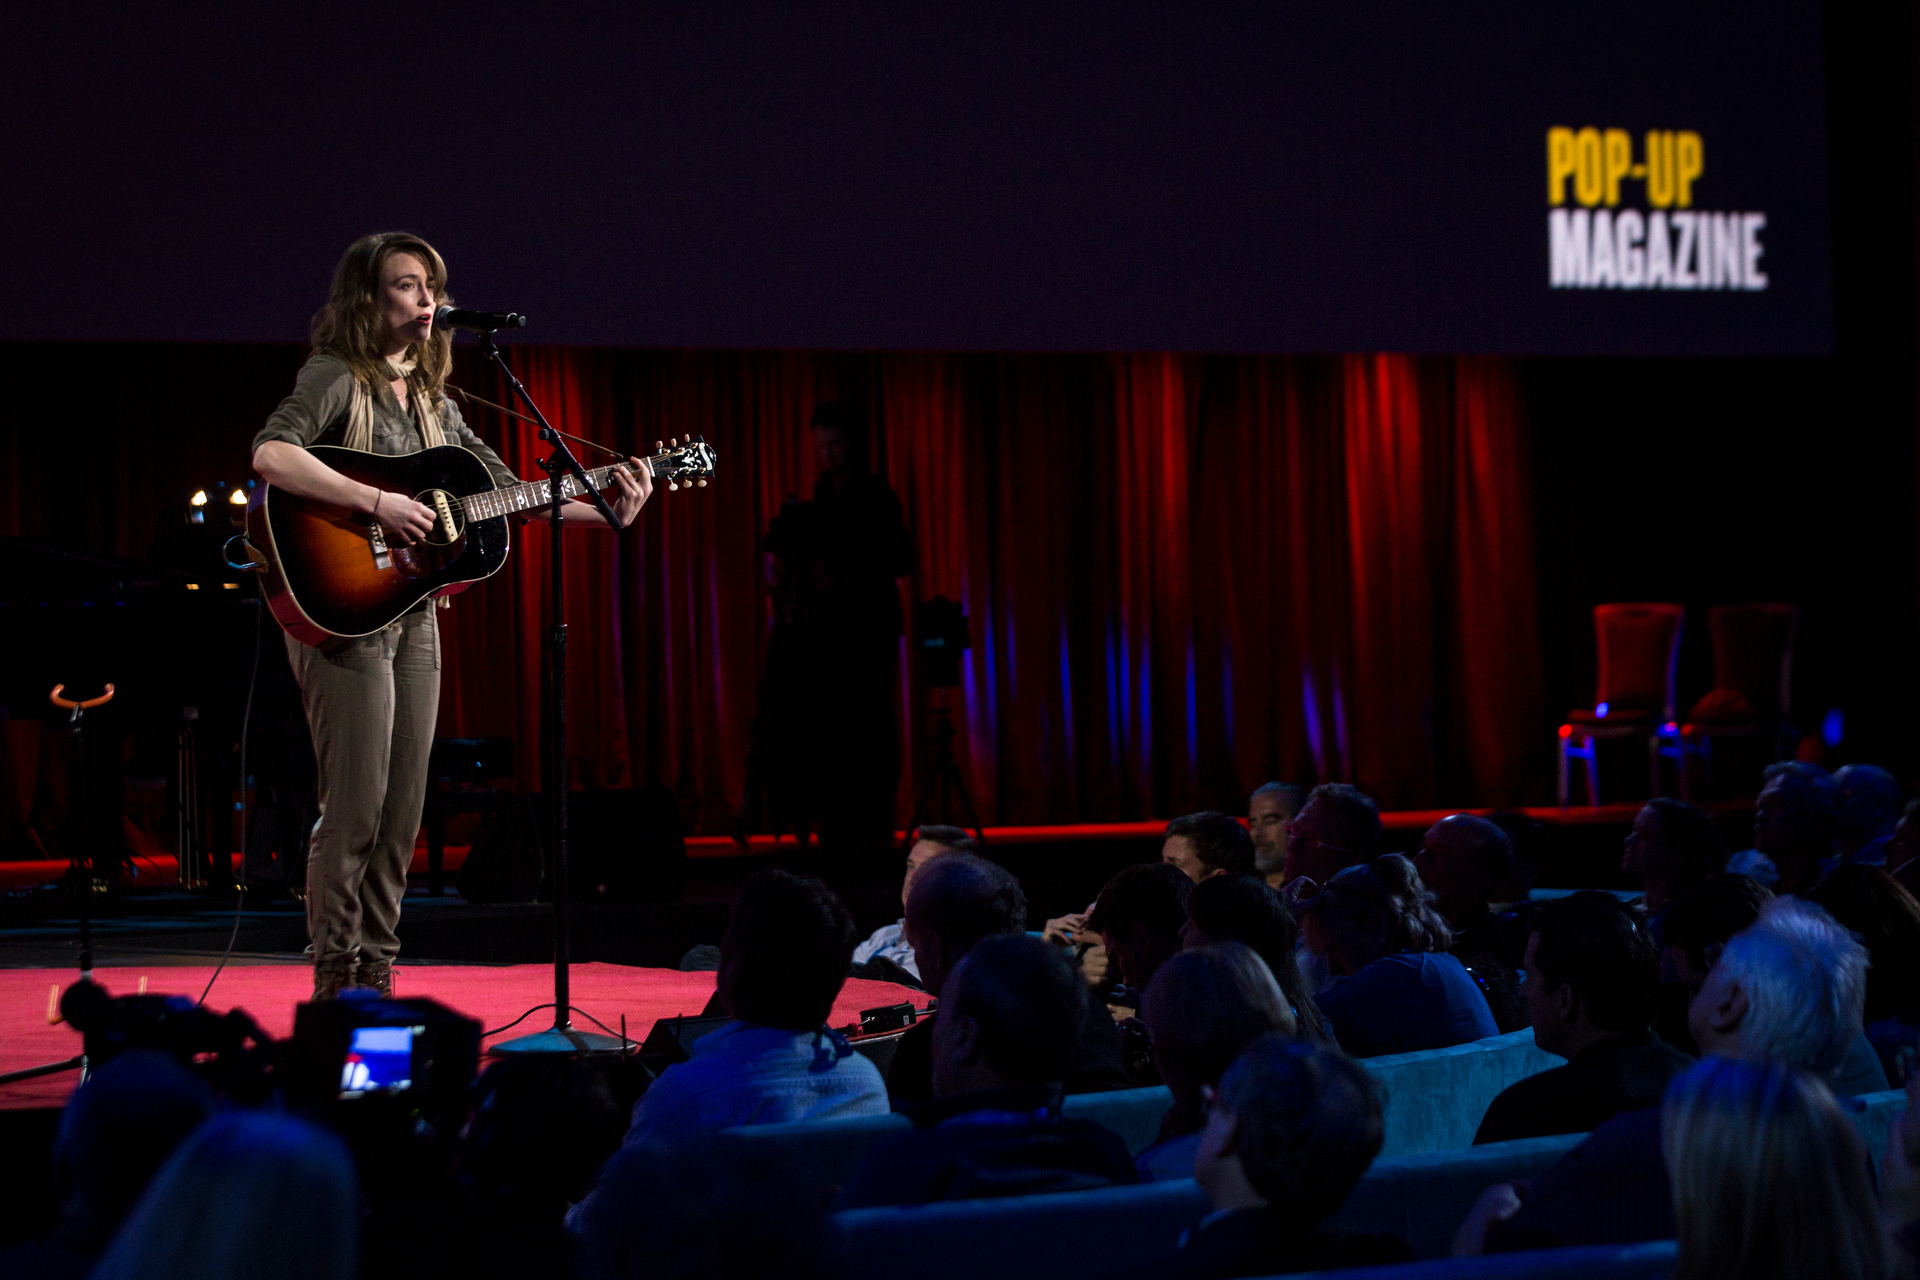 Dawn Landes performs at TED2015 - Truth and Dare, Session 8. Photo: Bret Hartman/TED